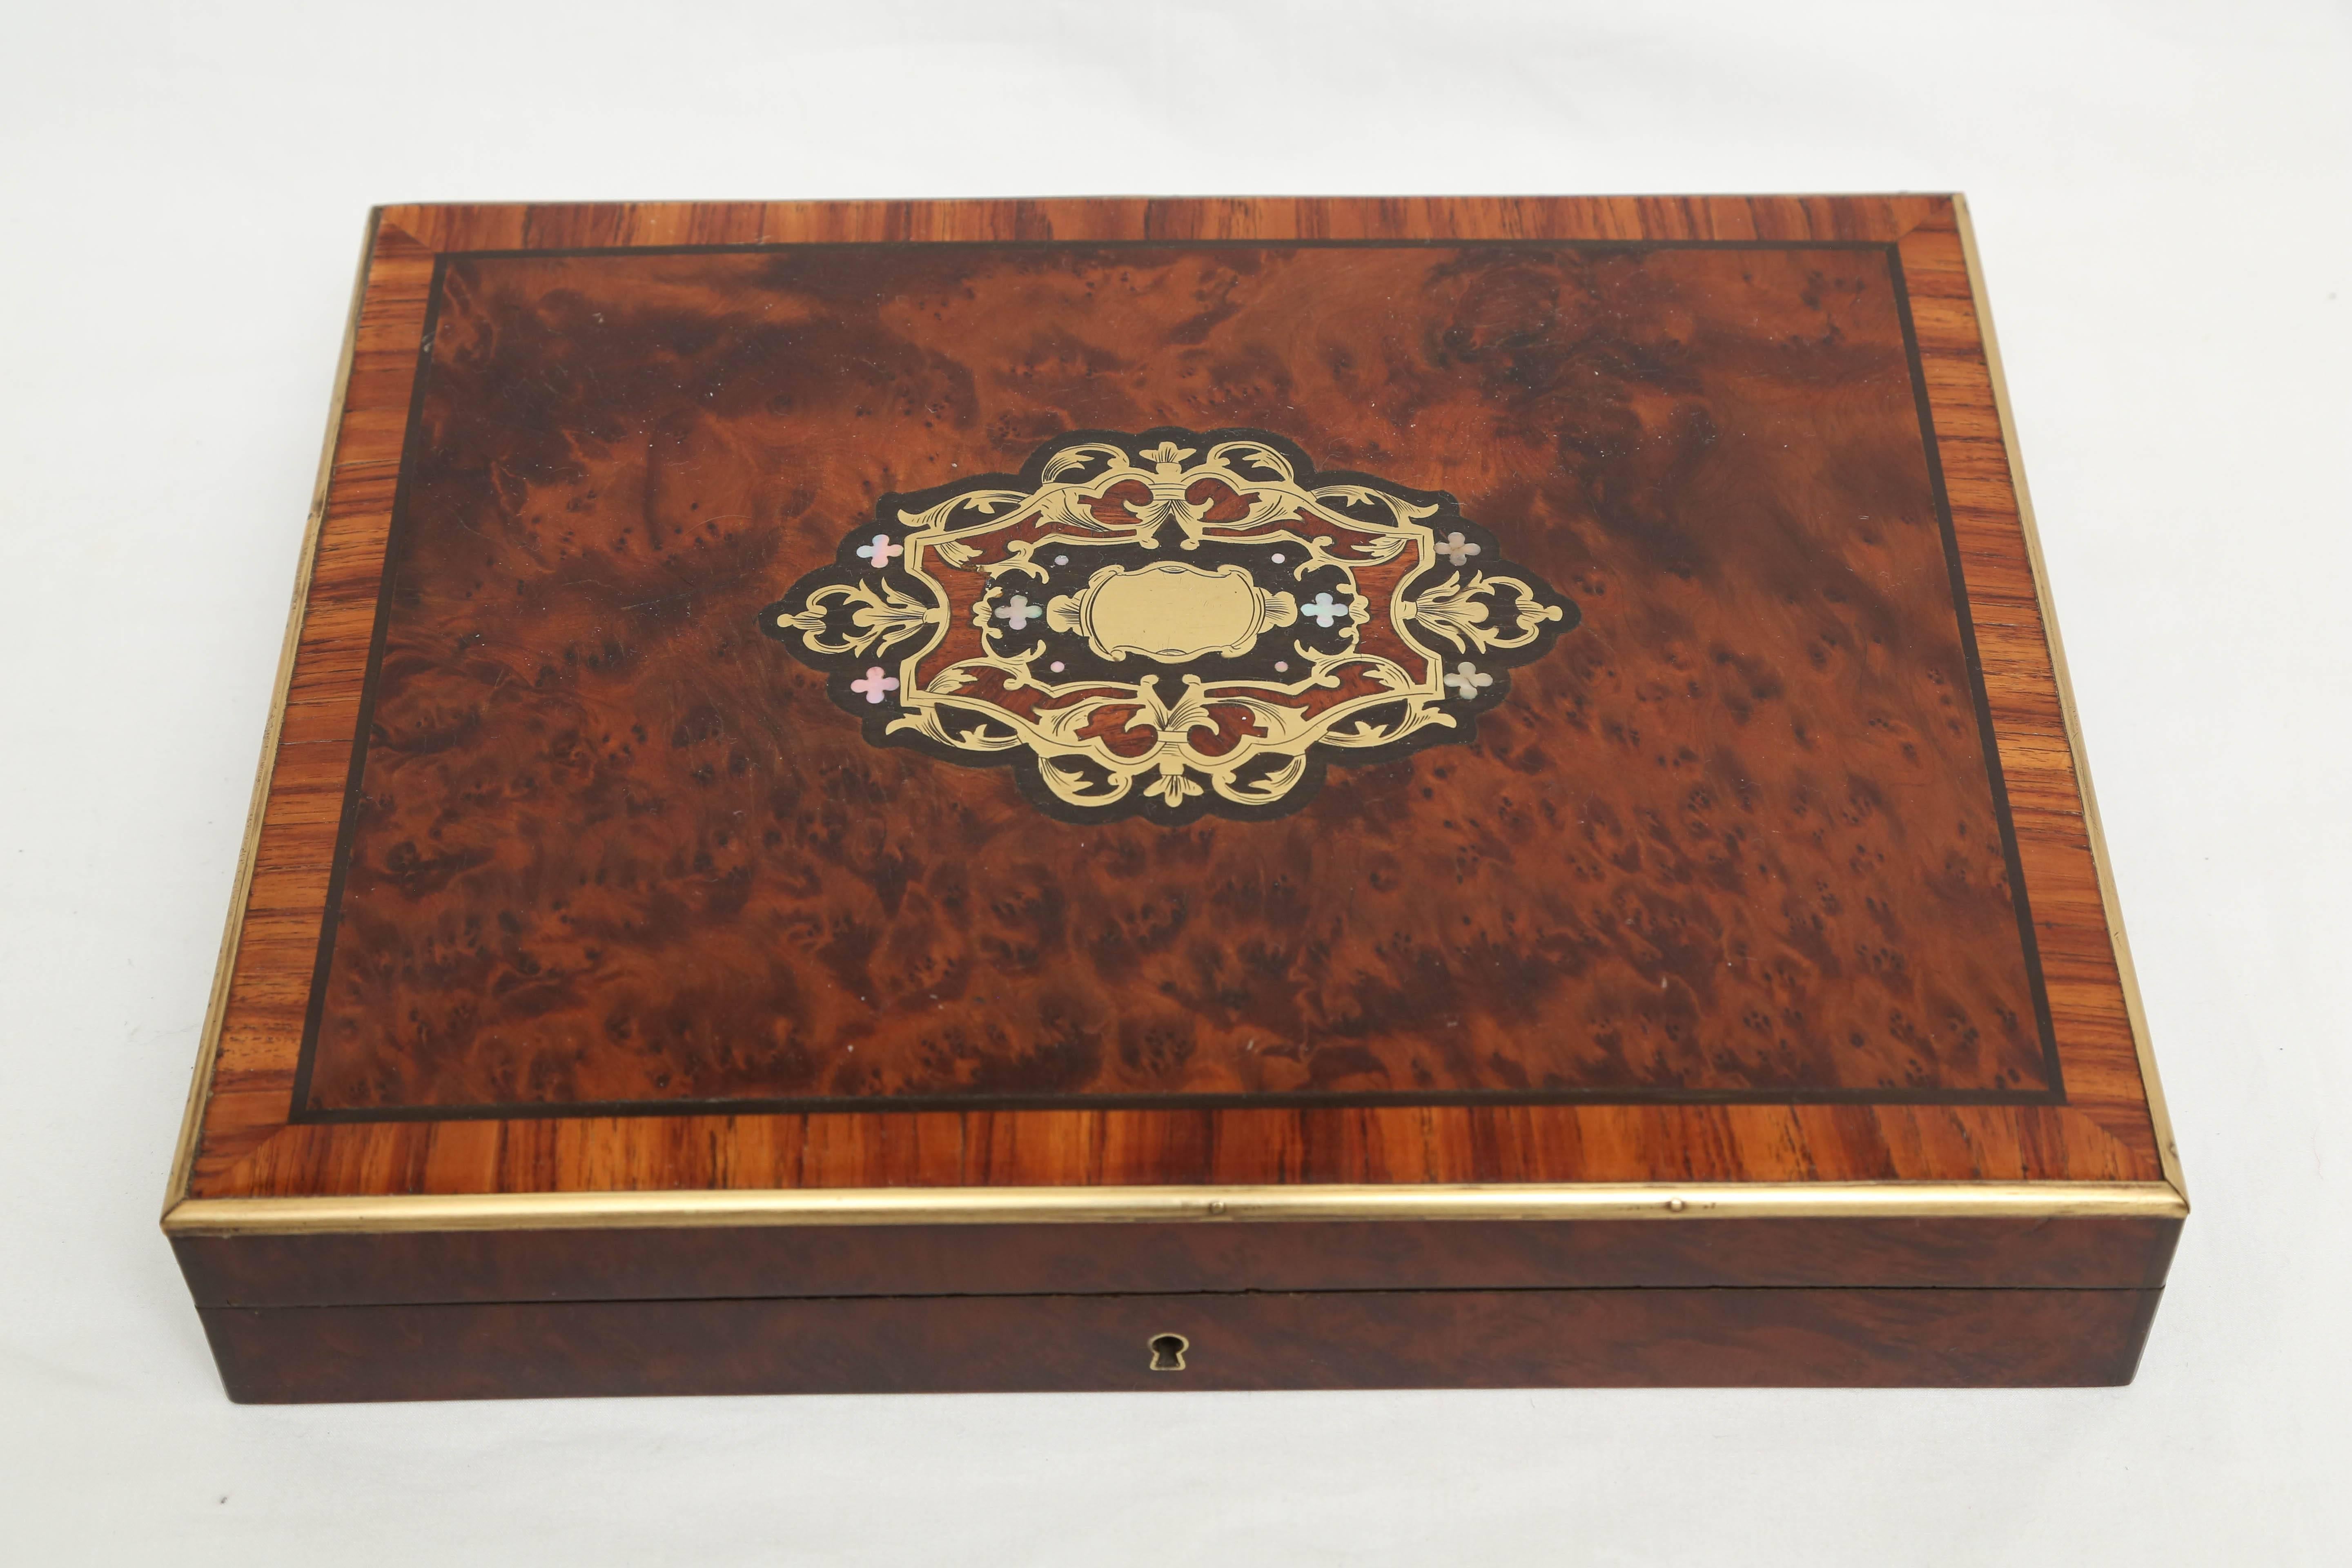 This slightly domed top box is appointed with brass and mother-of-pearl inlays.
In addition the burl wood top is crossbanded with a brass border.
Exquisite quality and workmanship.
It contains over 100 bone playing chips. The card deck of 37